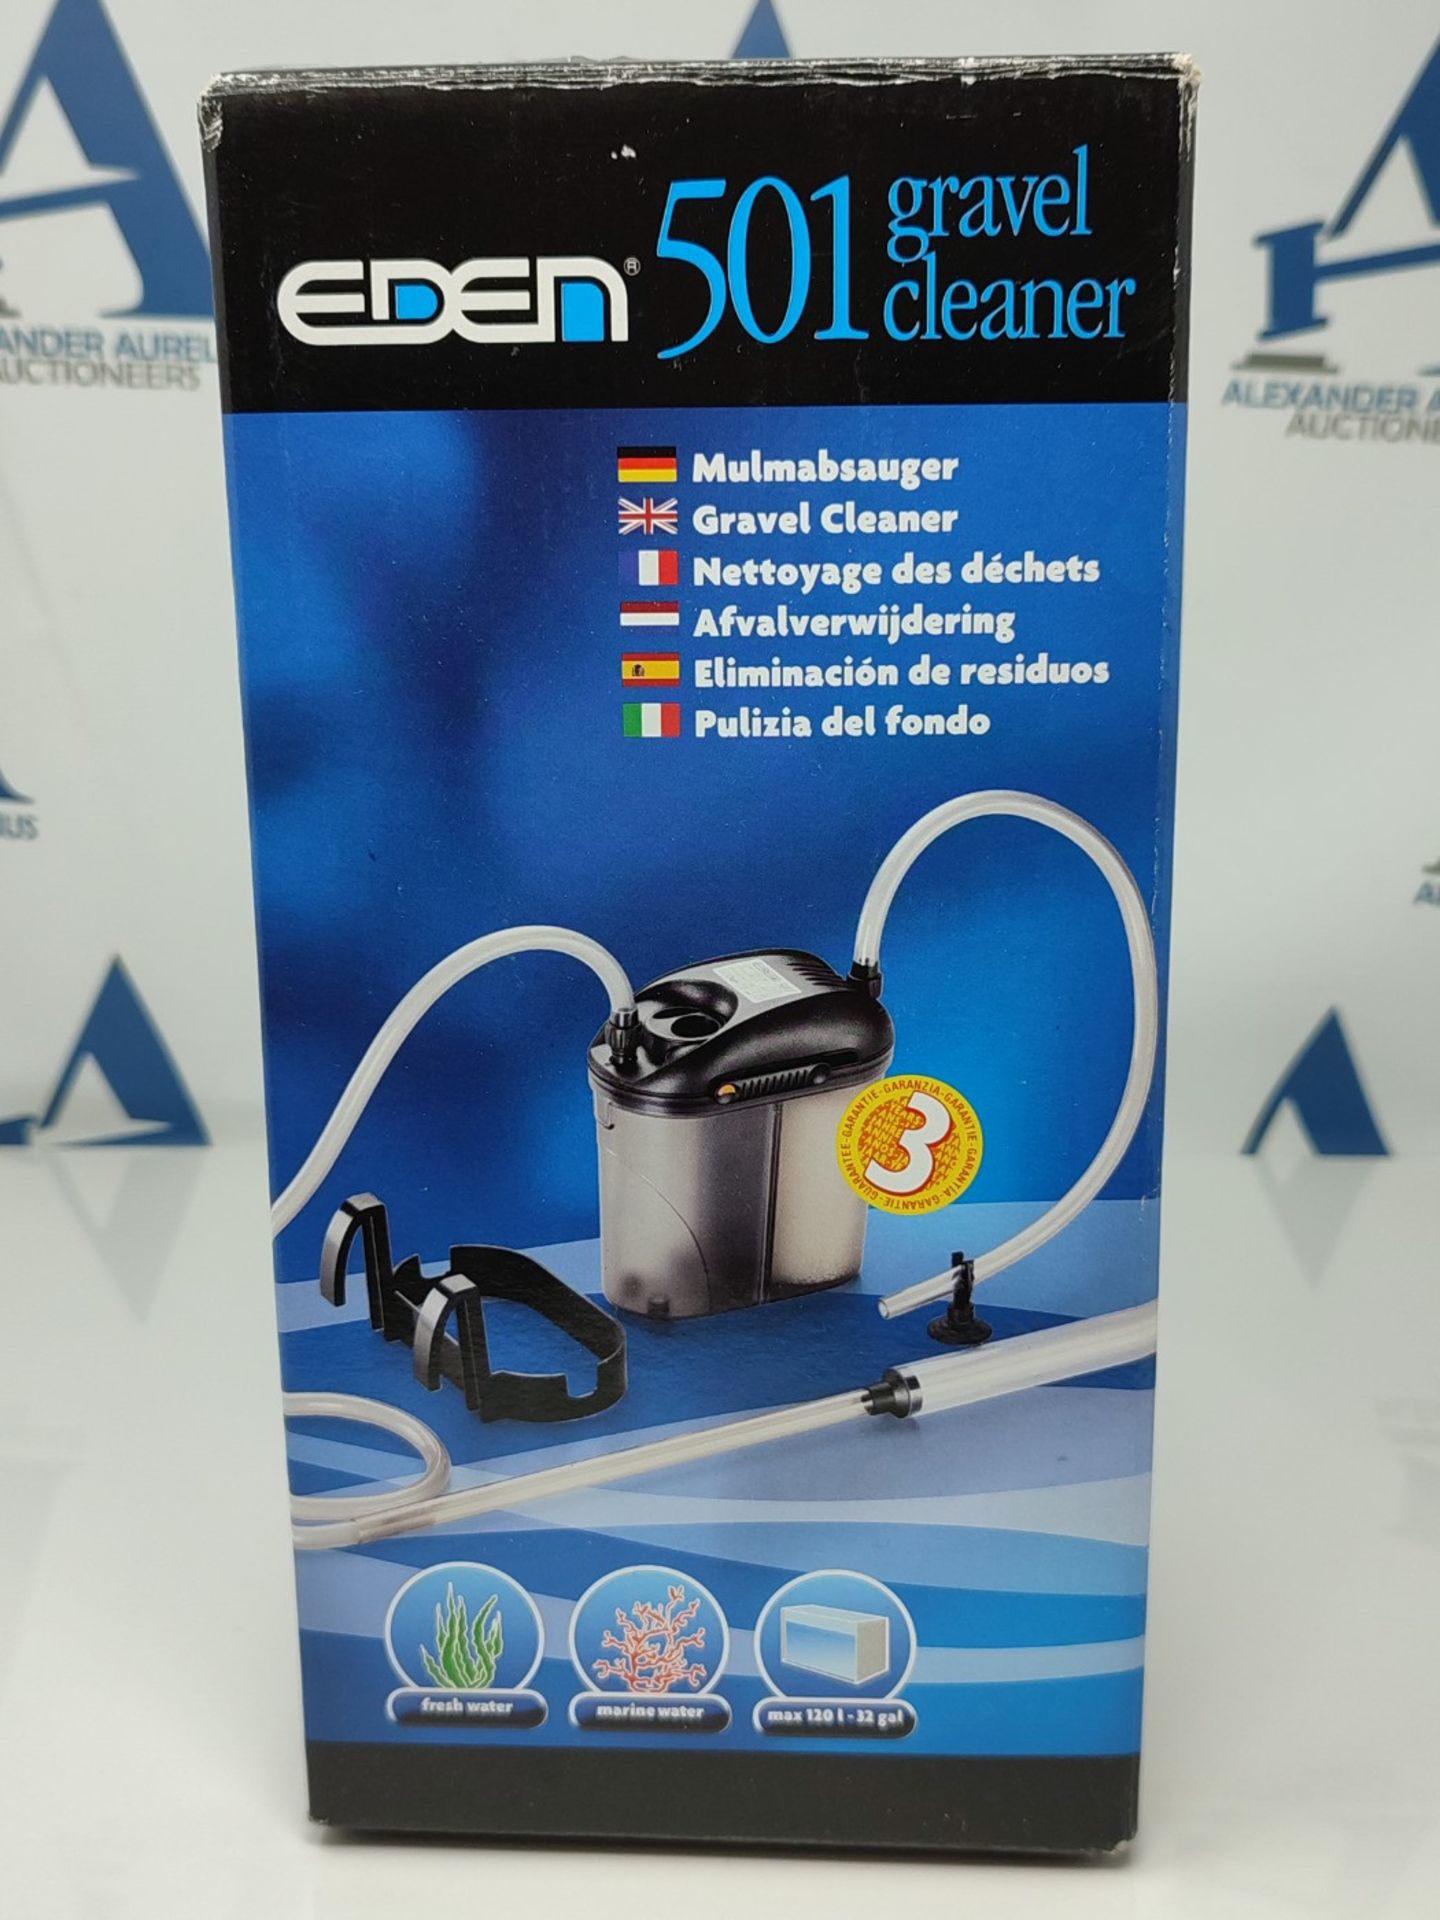 EDEN 57461 501 Gravel Cleaner - Gravel cleaner and sludge vacuum for suctioning mulm a - Image 2 of 3